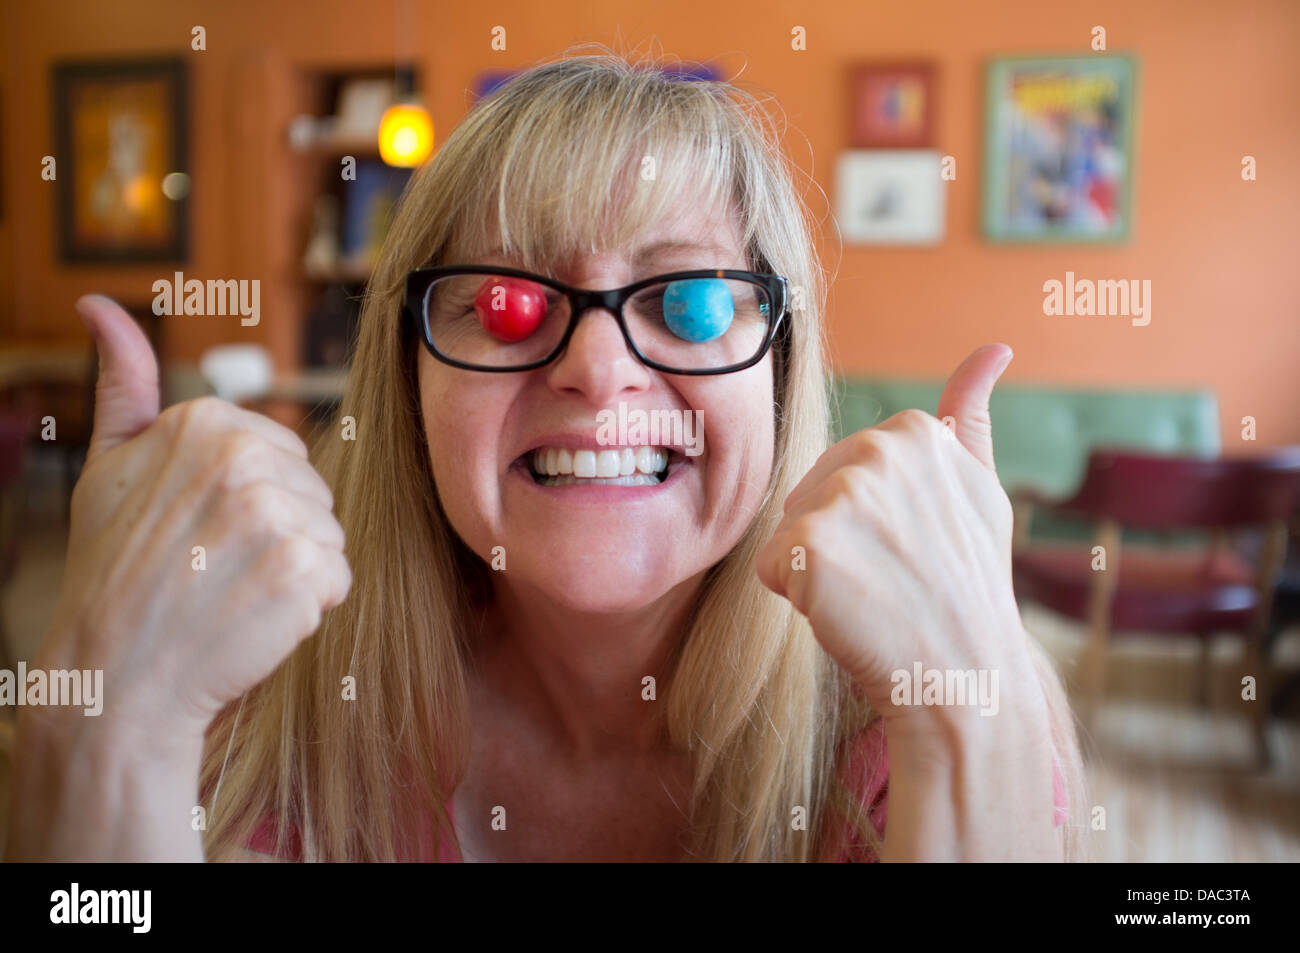 Woman with gum ball eyes and glasses giving thumbs up. Stock Photo